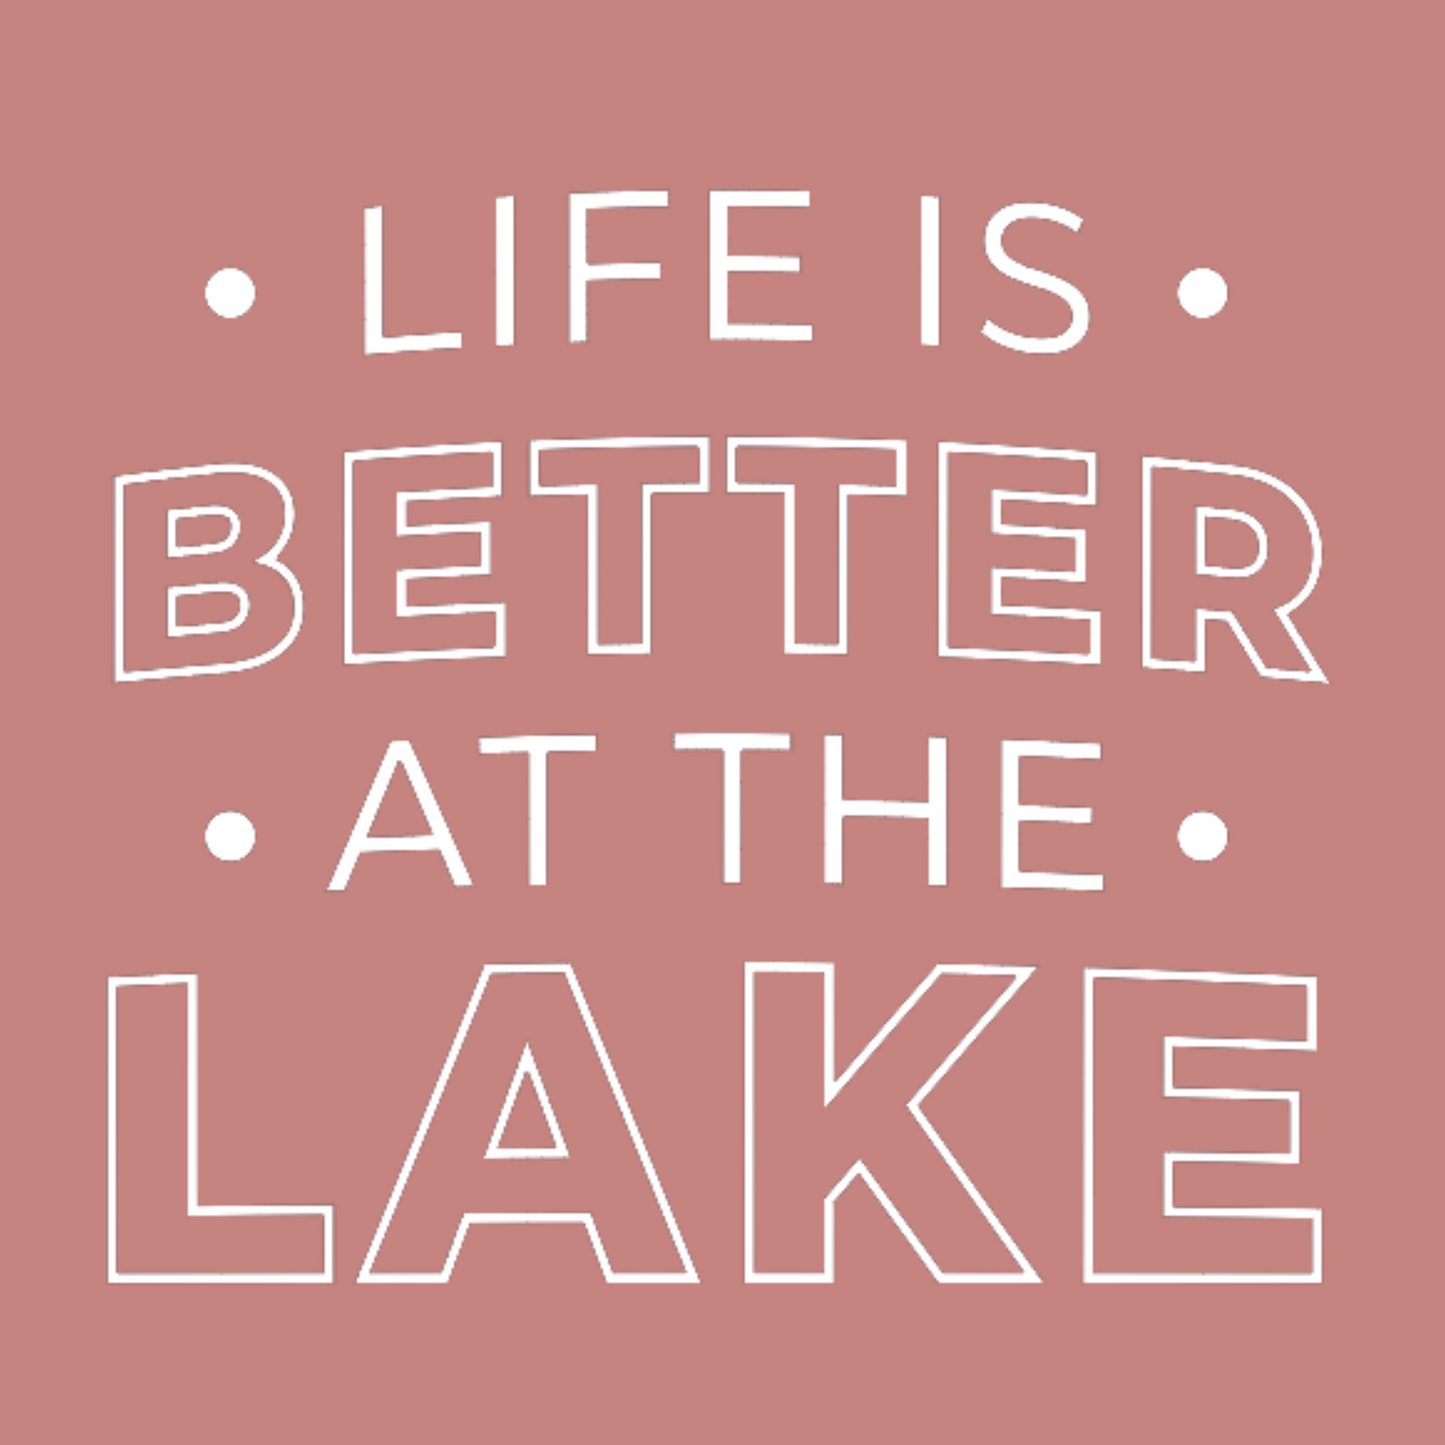 Life Is Better By The Lake design in white with a mauve background. Made for a better view of the design.